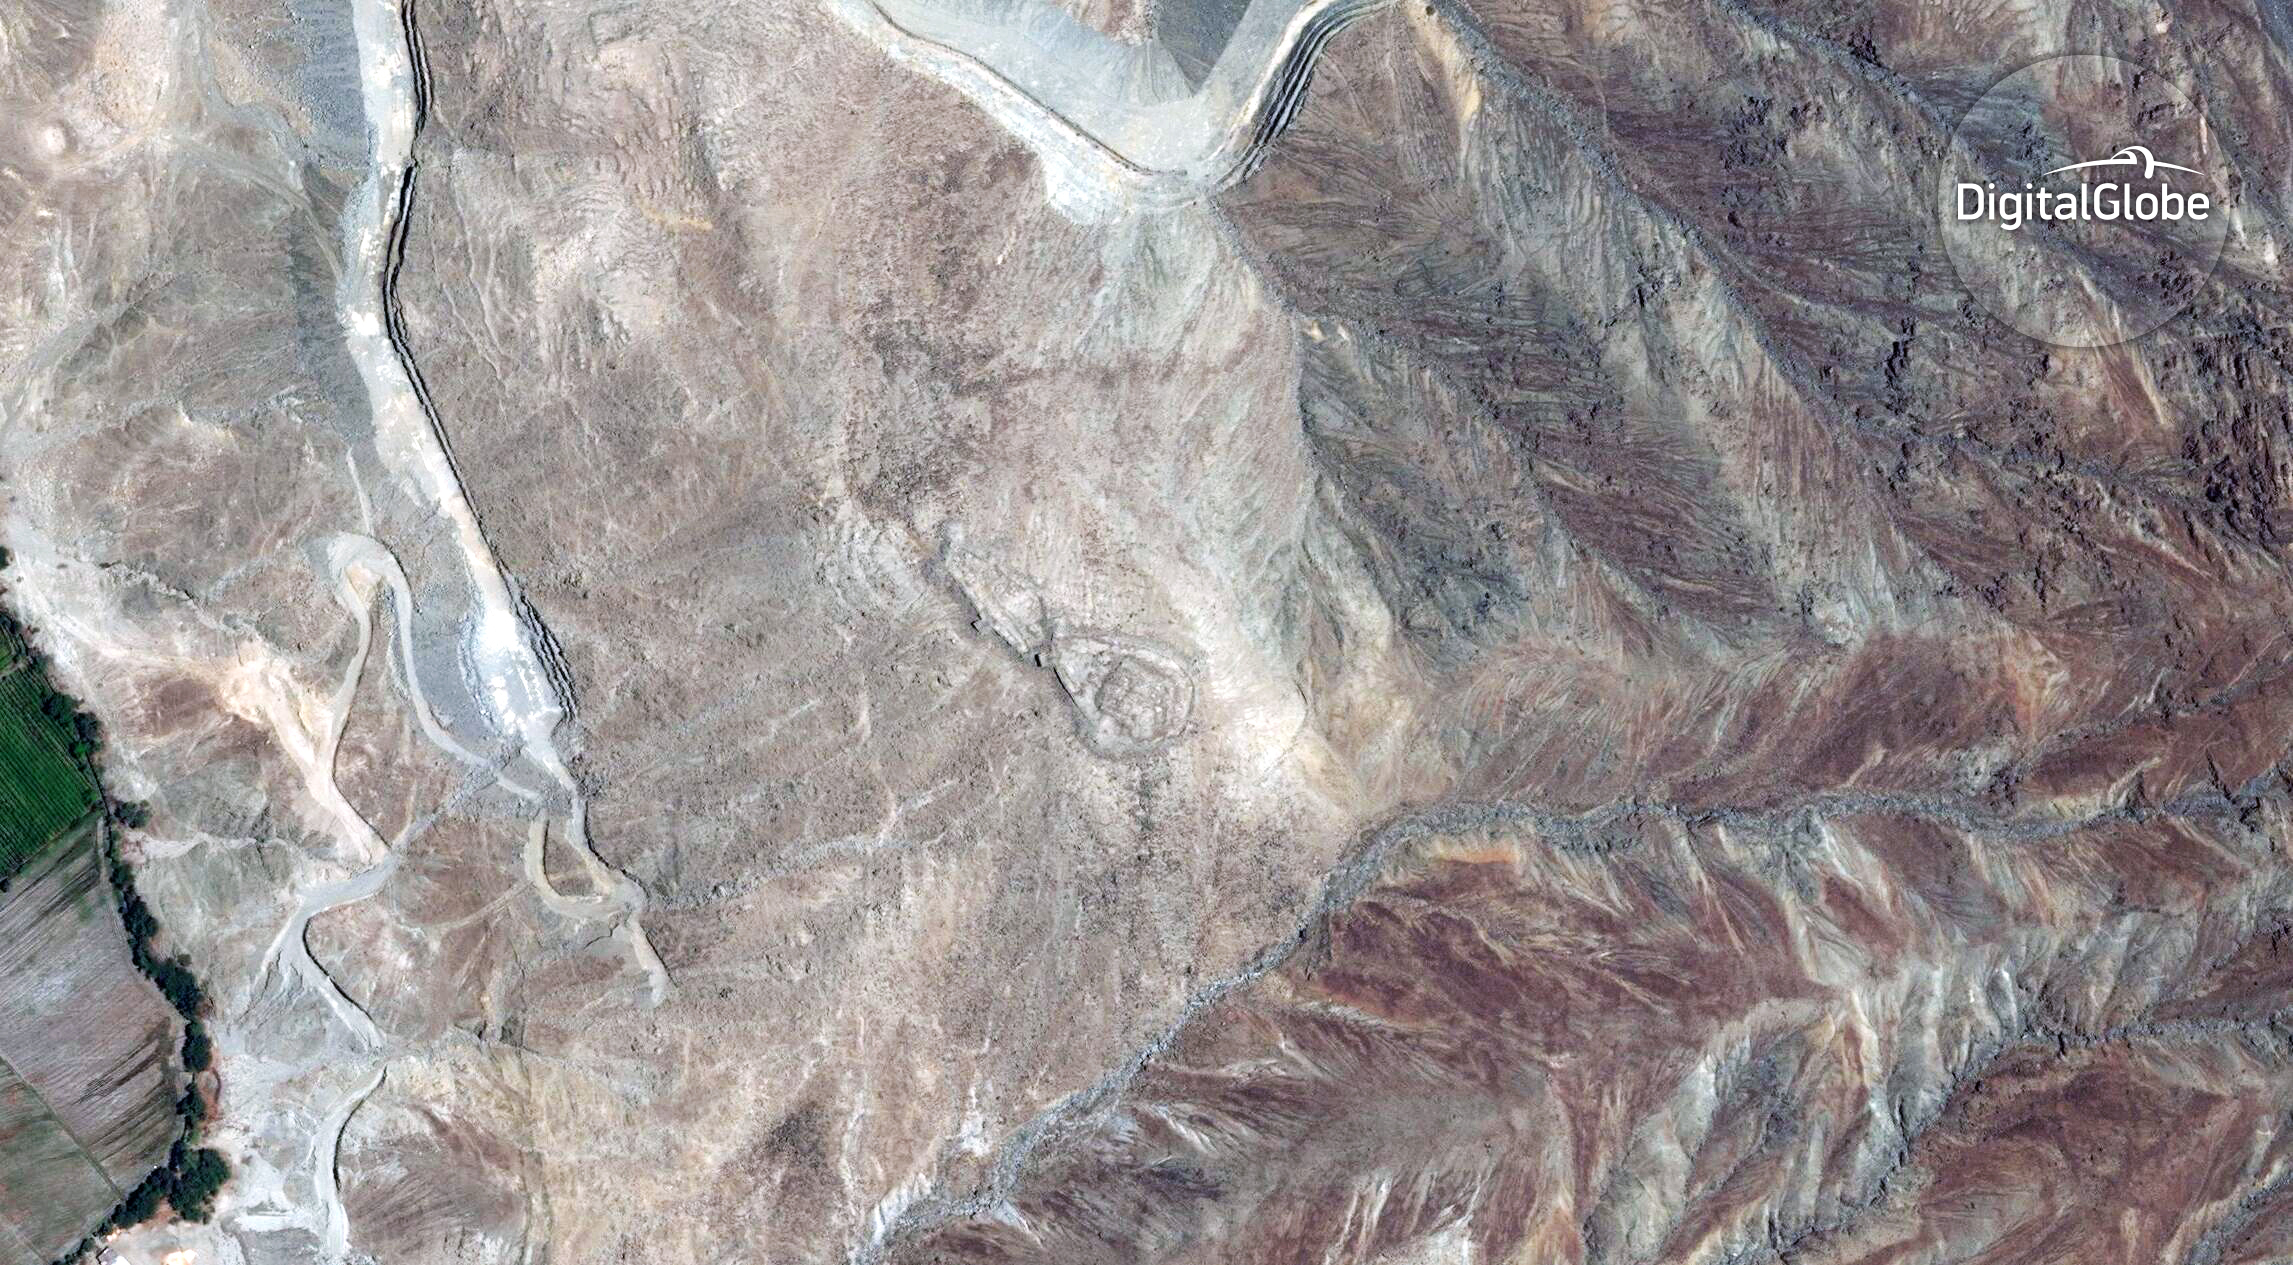 Users will search more than 200,000 square kilometers of satellite imagery. Large sections like this will be broken into smaller tiles — and archaeological features like this stone structure on a hill in Peru's highlands. Image: ©DigitalGlobe 2017